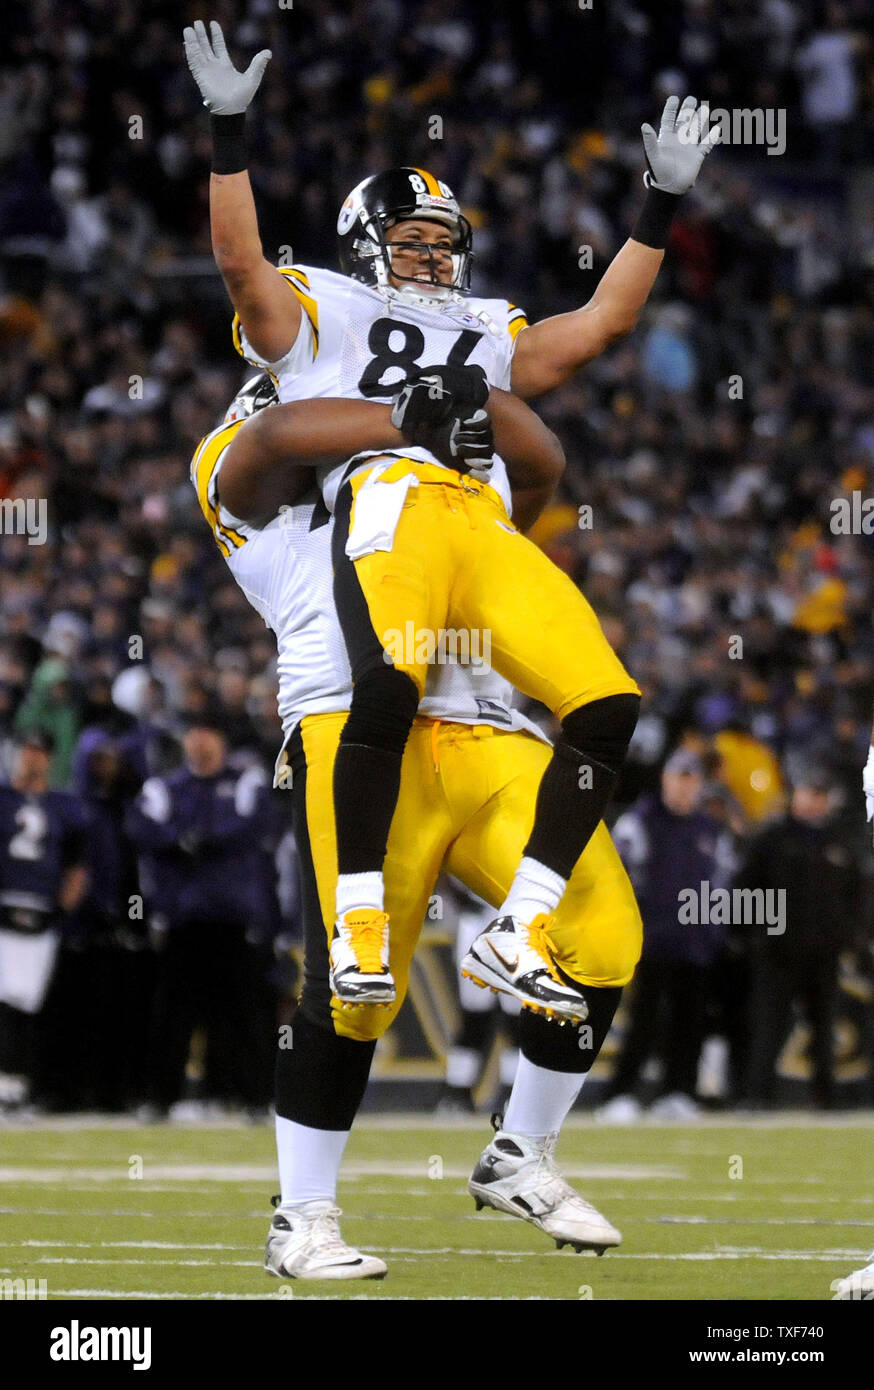 Pittsburgh Steelers wide receiver Hines Ward (86) is lifted up by teammate Willie Colon as they celebrate after Steelers' wide receiver Santonio Holmes scored the winning touchdown, defeating the Baltimore Ravens 13-9, at M & T Bank Stadium in Baltimore, Maryland on December 14, 2008. (UPI Photo/Kevin Dietsch) Stock Photo